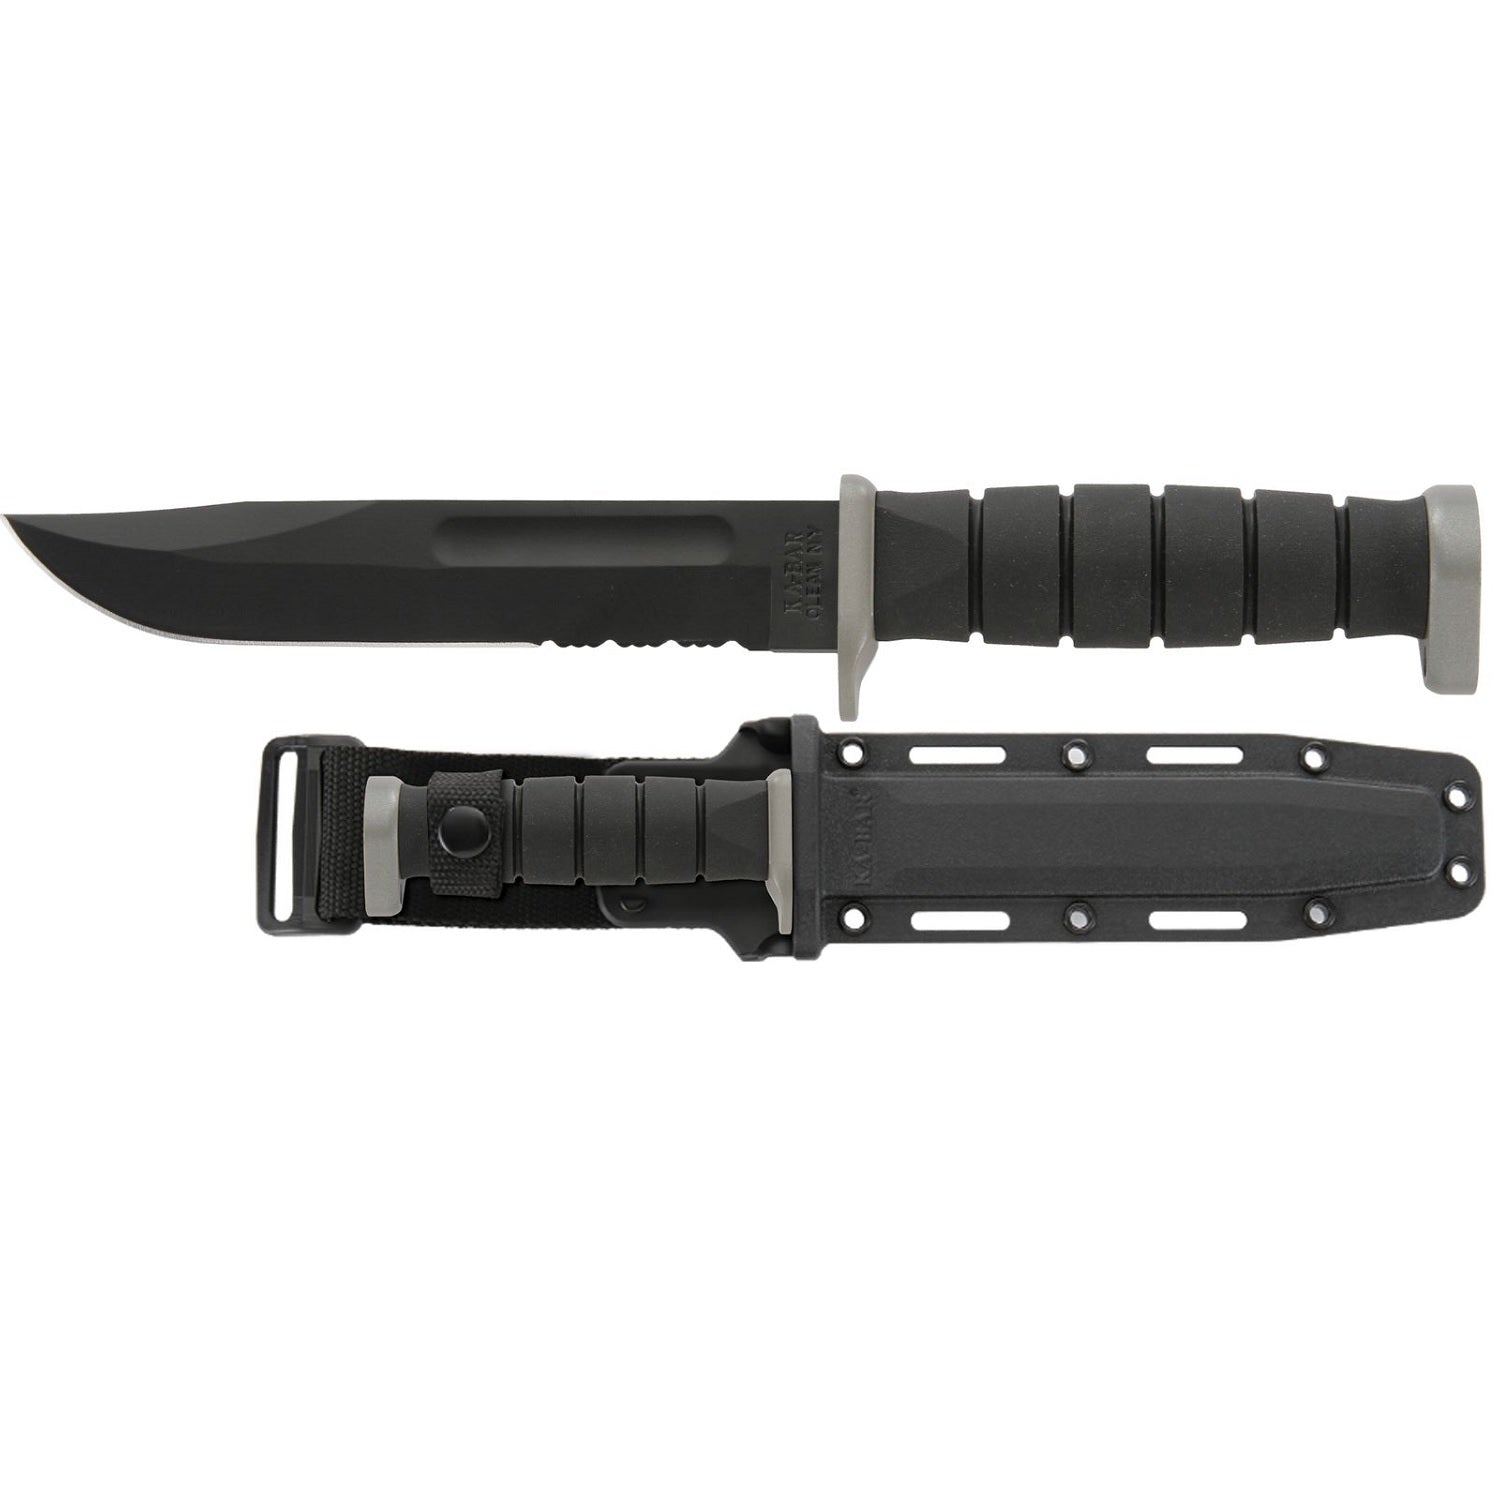 KA-BAR Bowie Fixed 7.0 in Black Combo Blade Polymer Handle